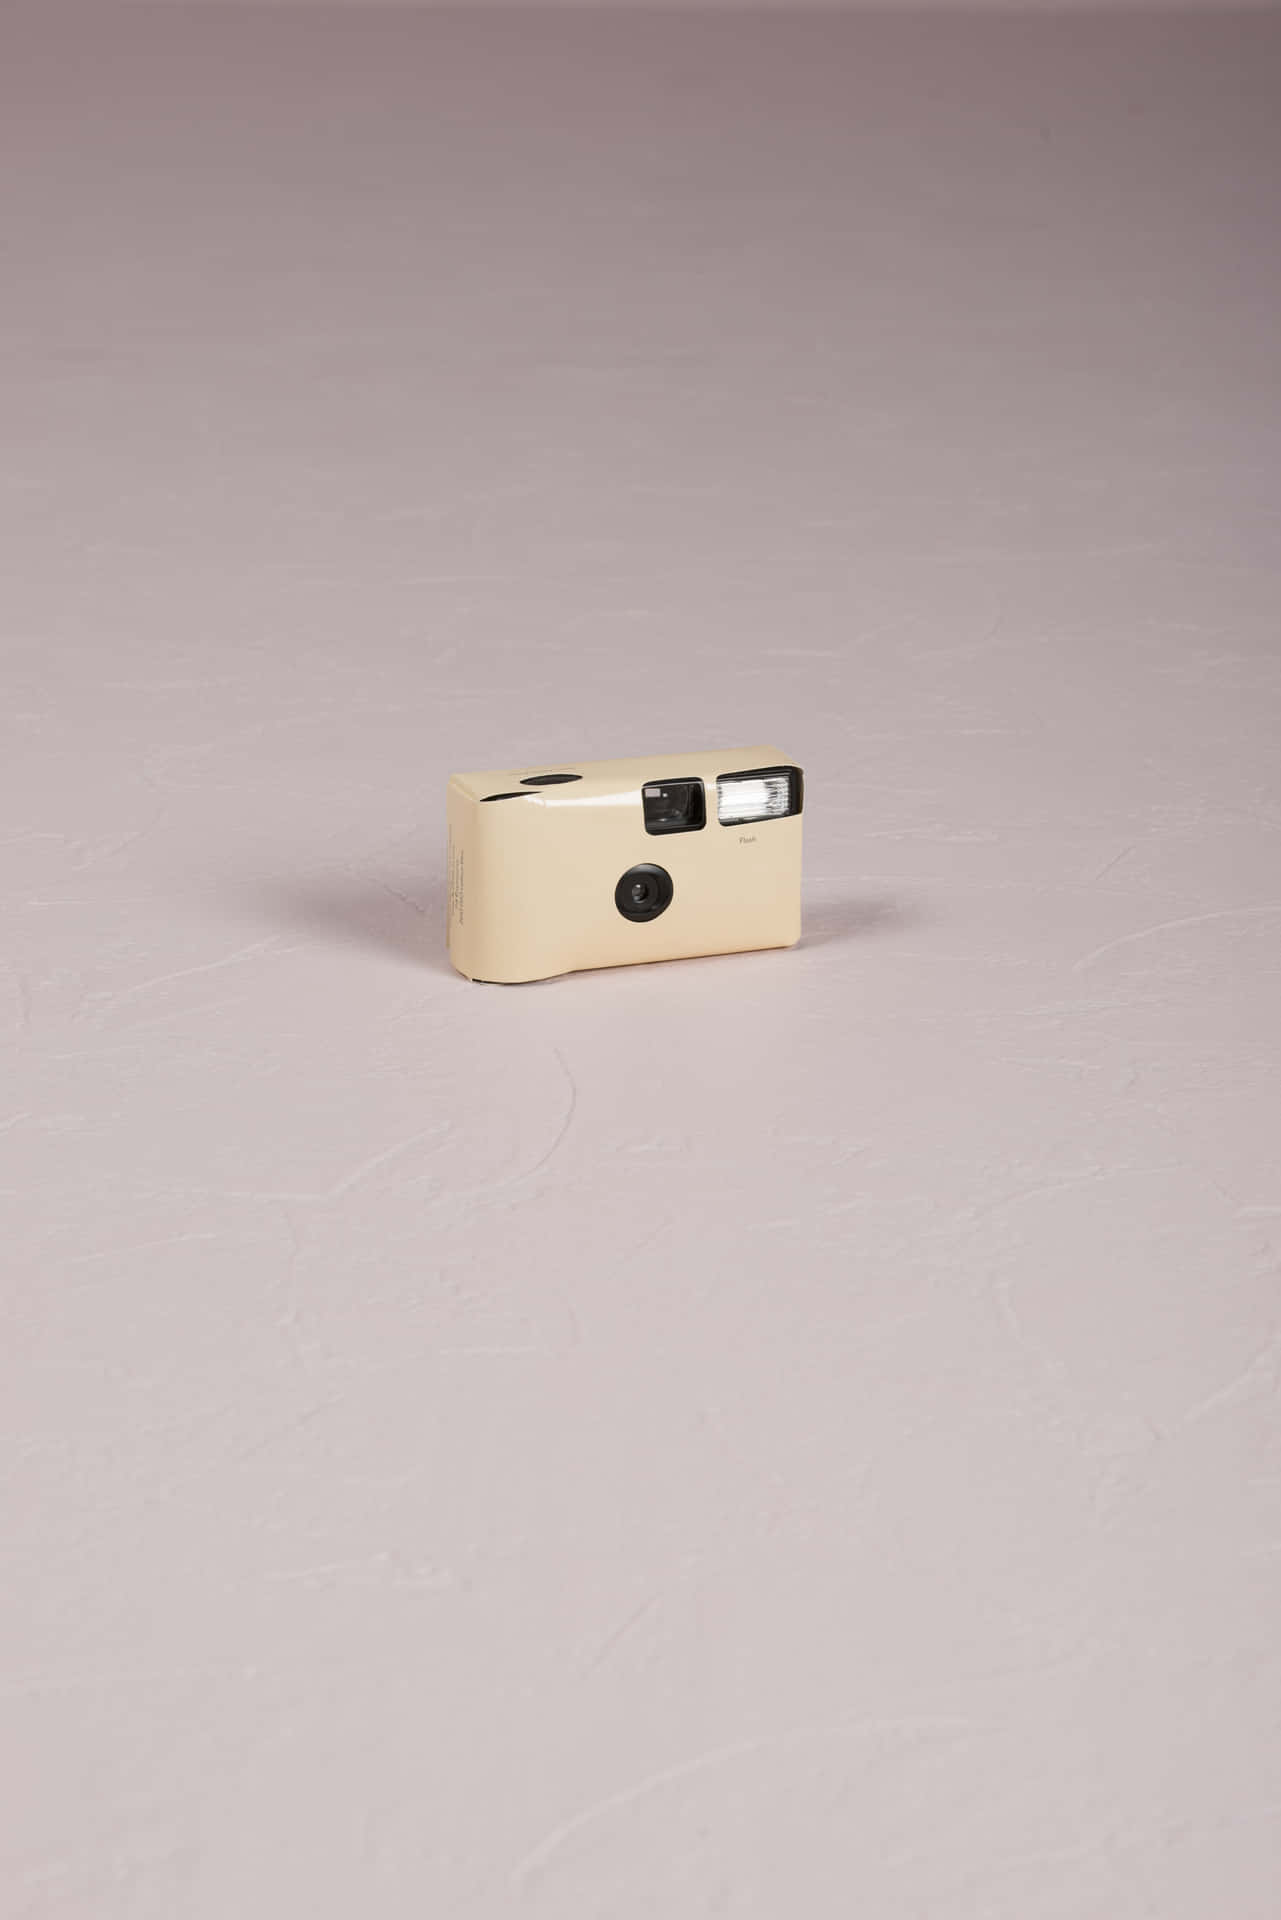 Capture Your Moments with a Disposable Camera